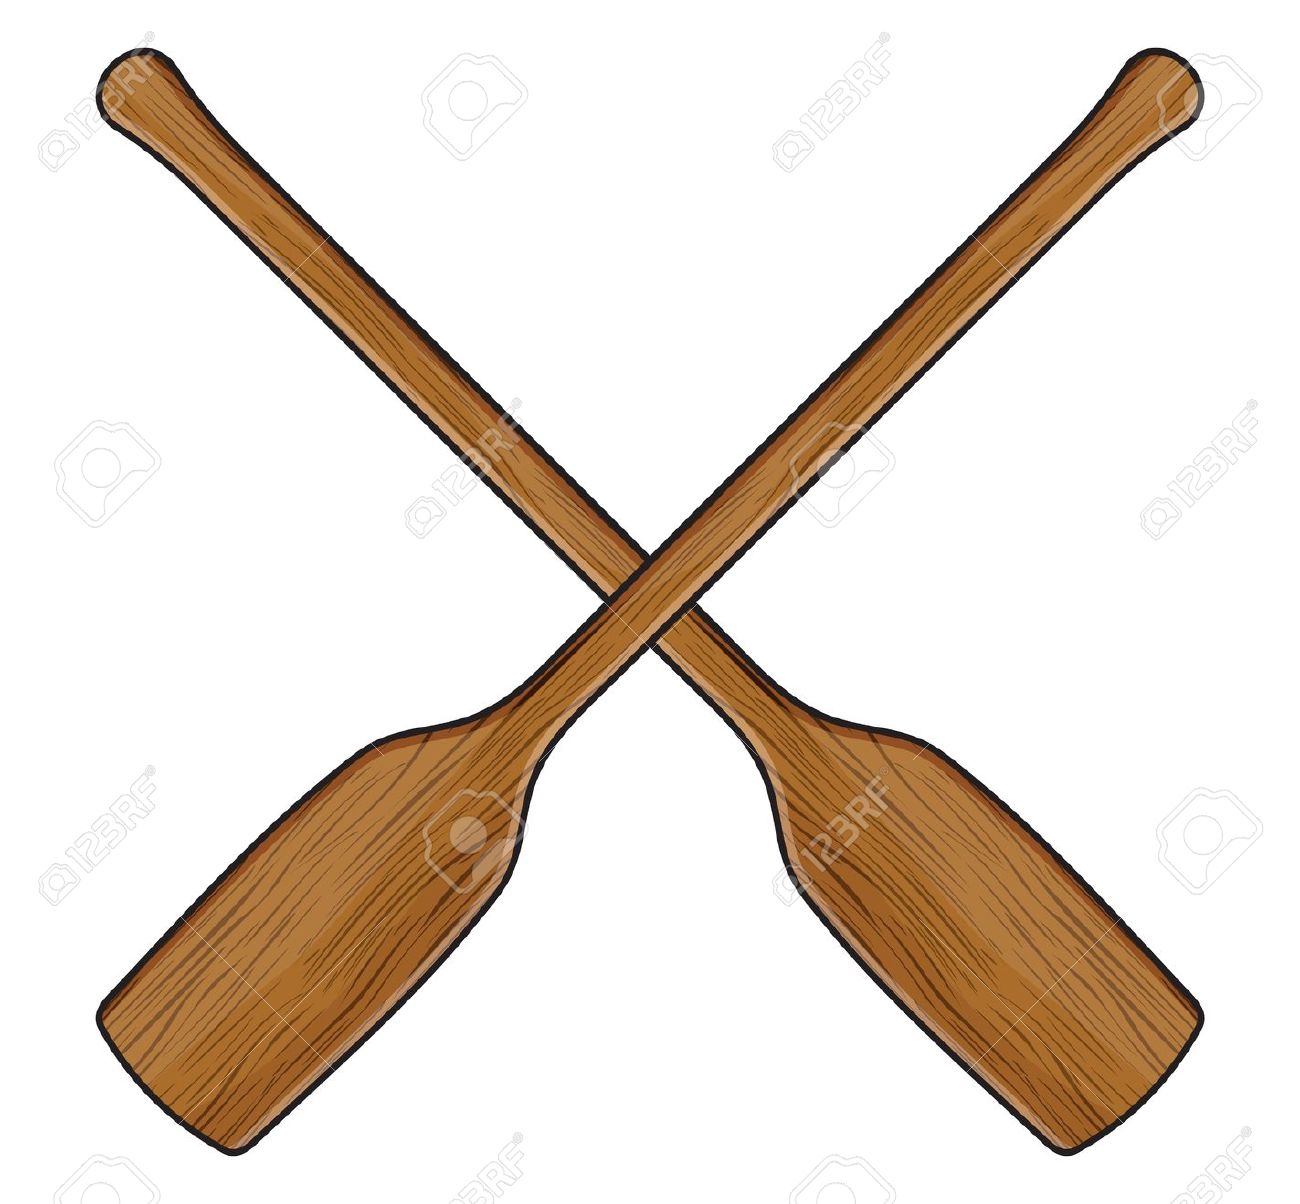 Paddles clipart - Clipground